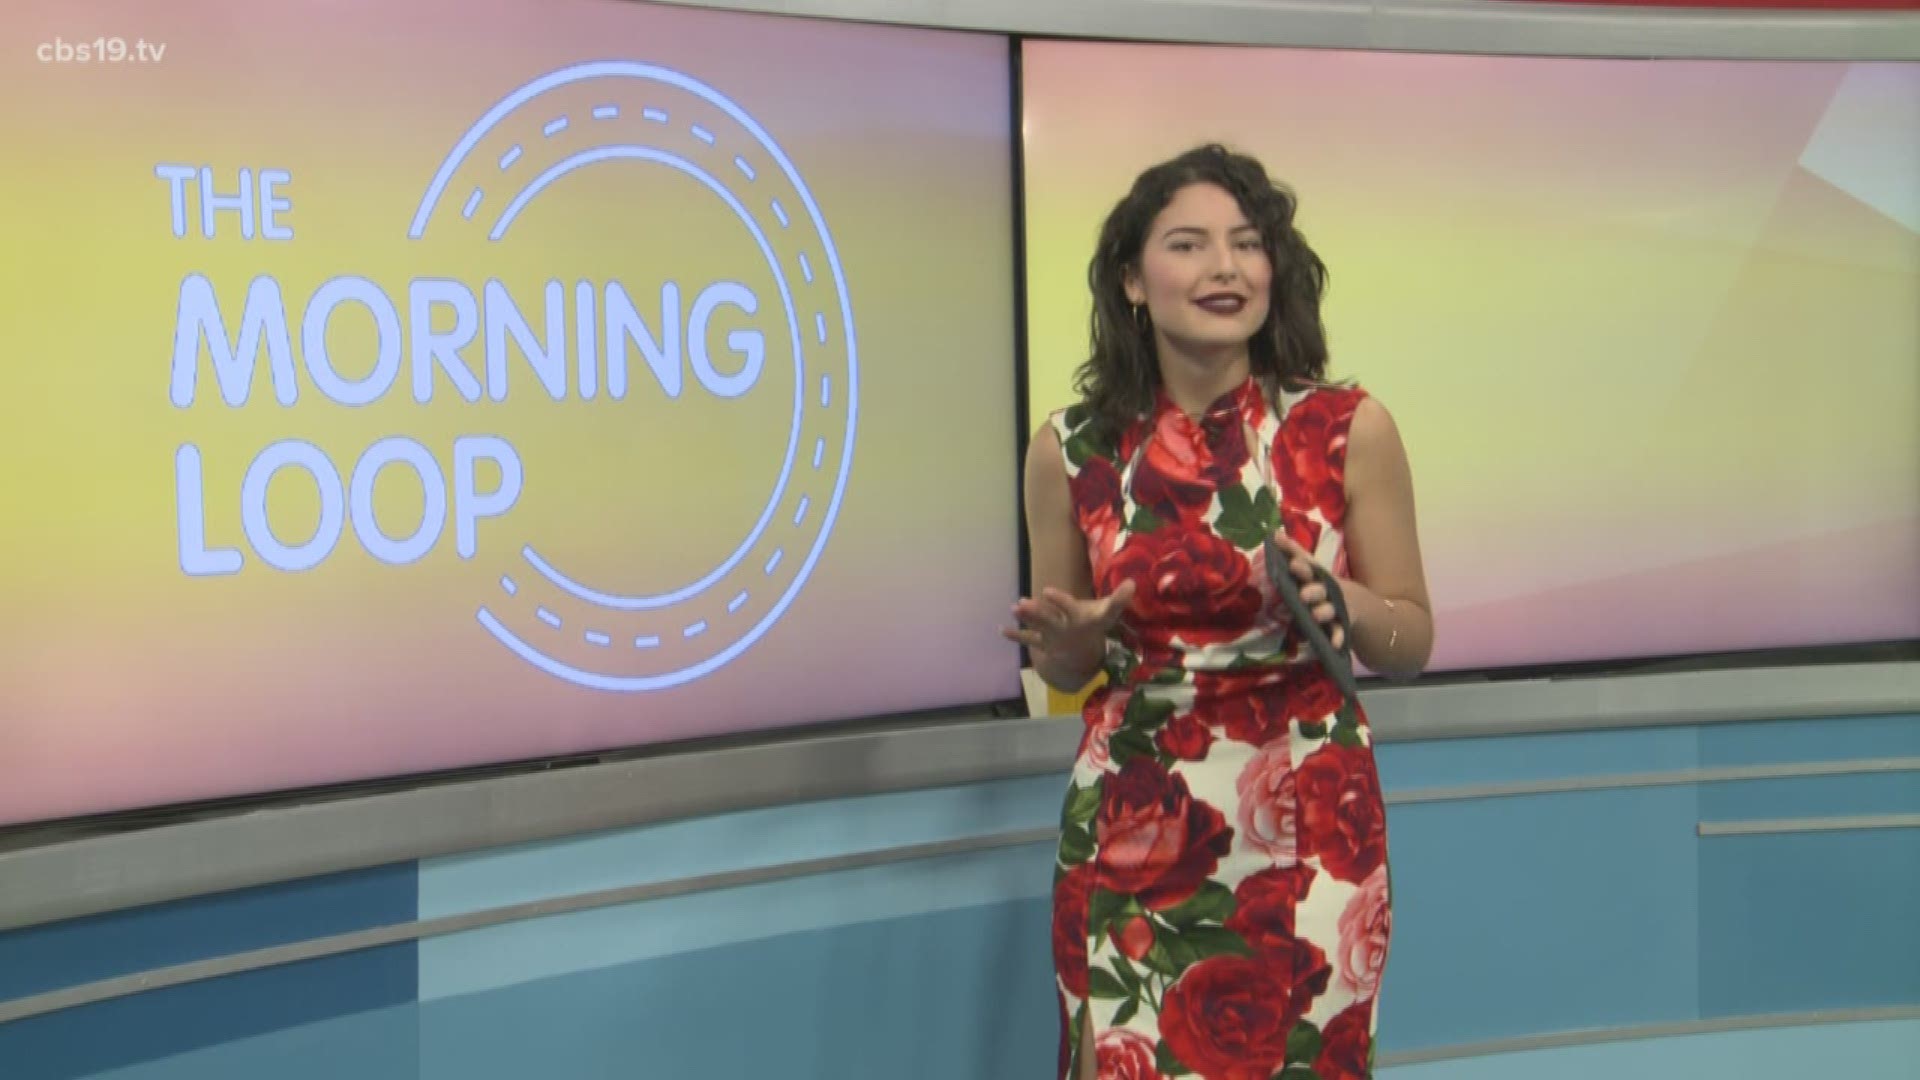 Gaby gives some fun facts about today's holiday and shares what some East Texans are reading this morning. 